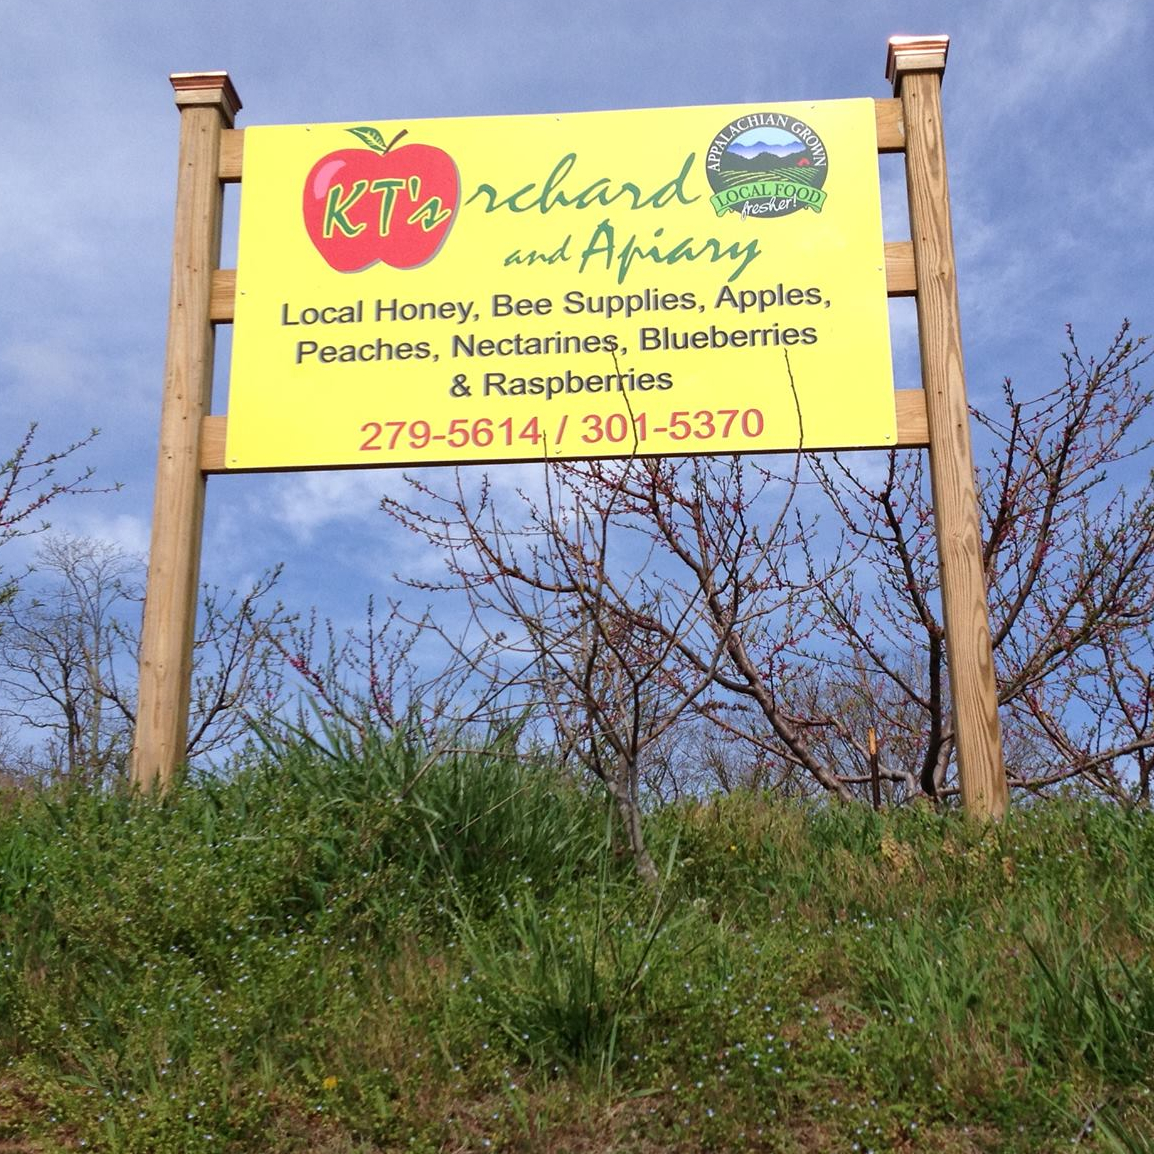 KT's Orchard & Apiary